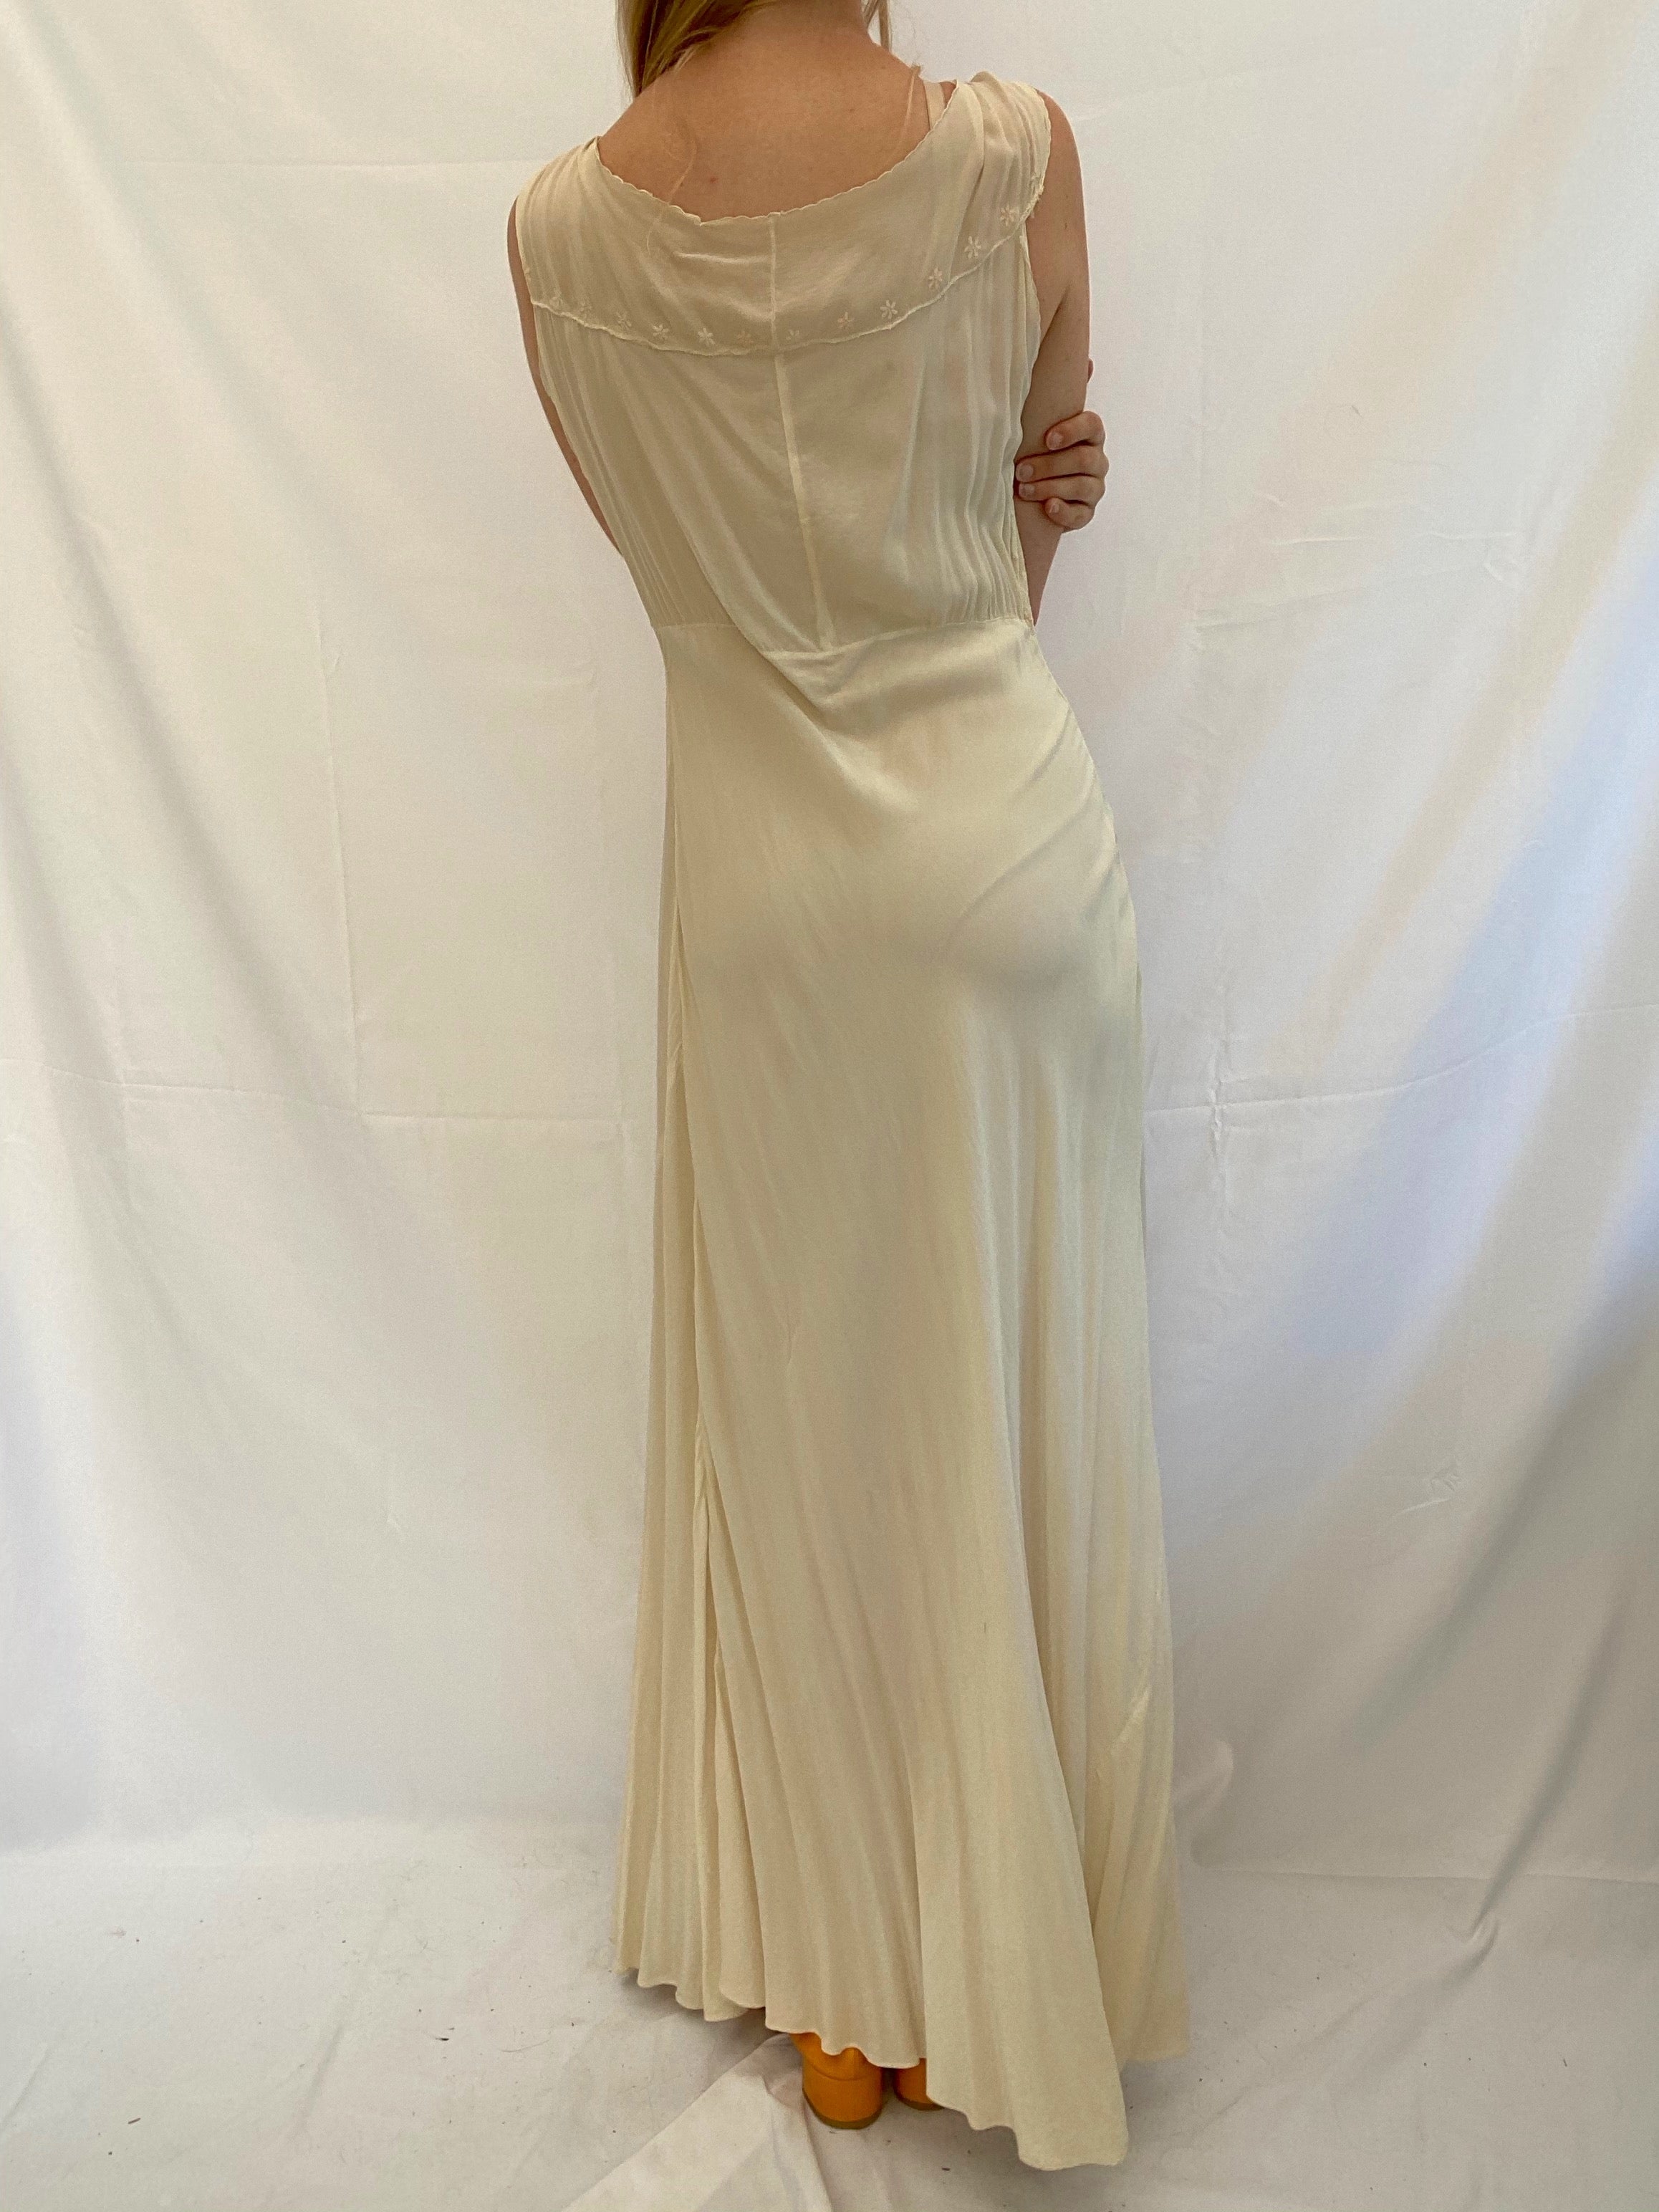 Cream Silk Dress with Delicate Floral Embroidery